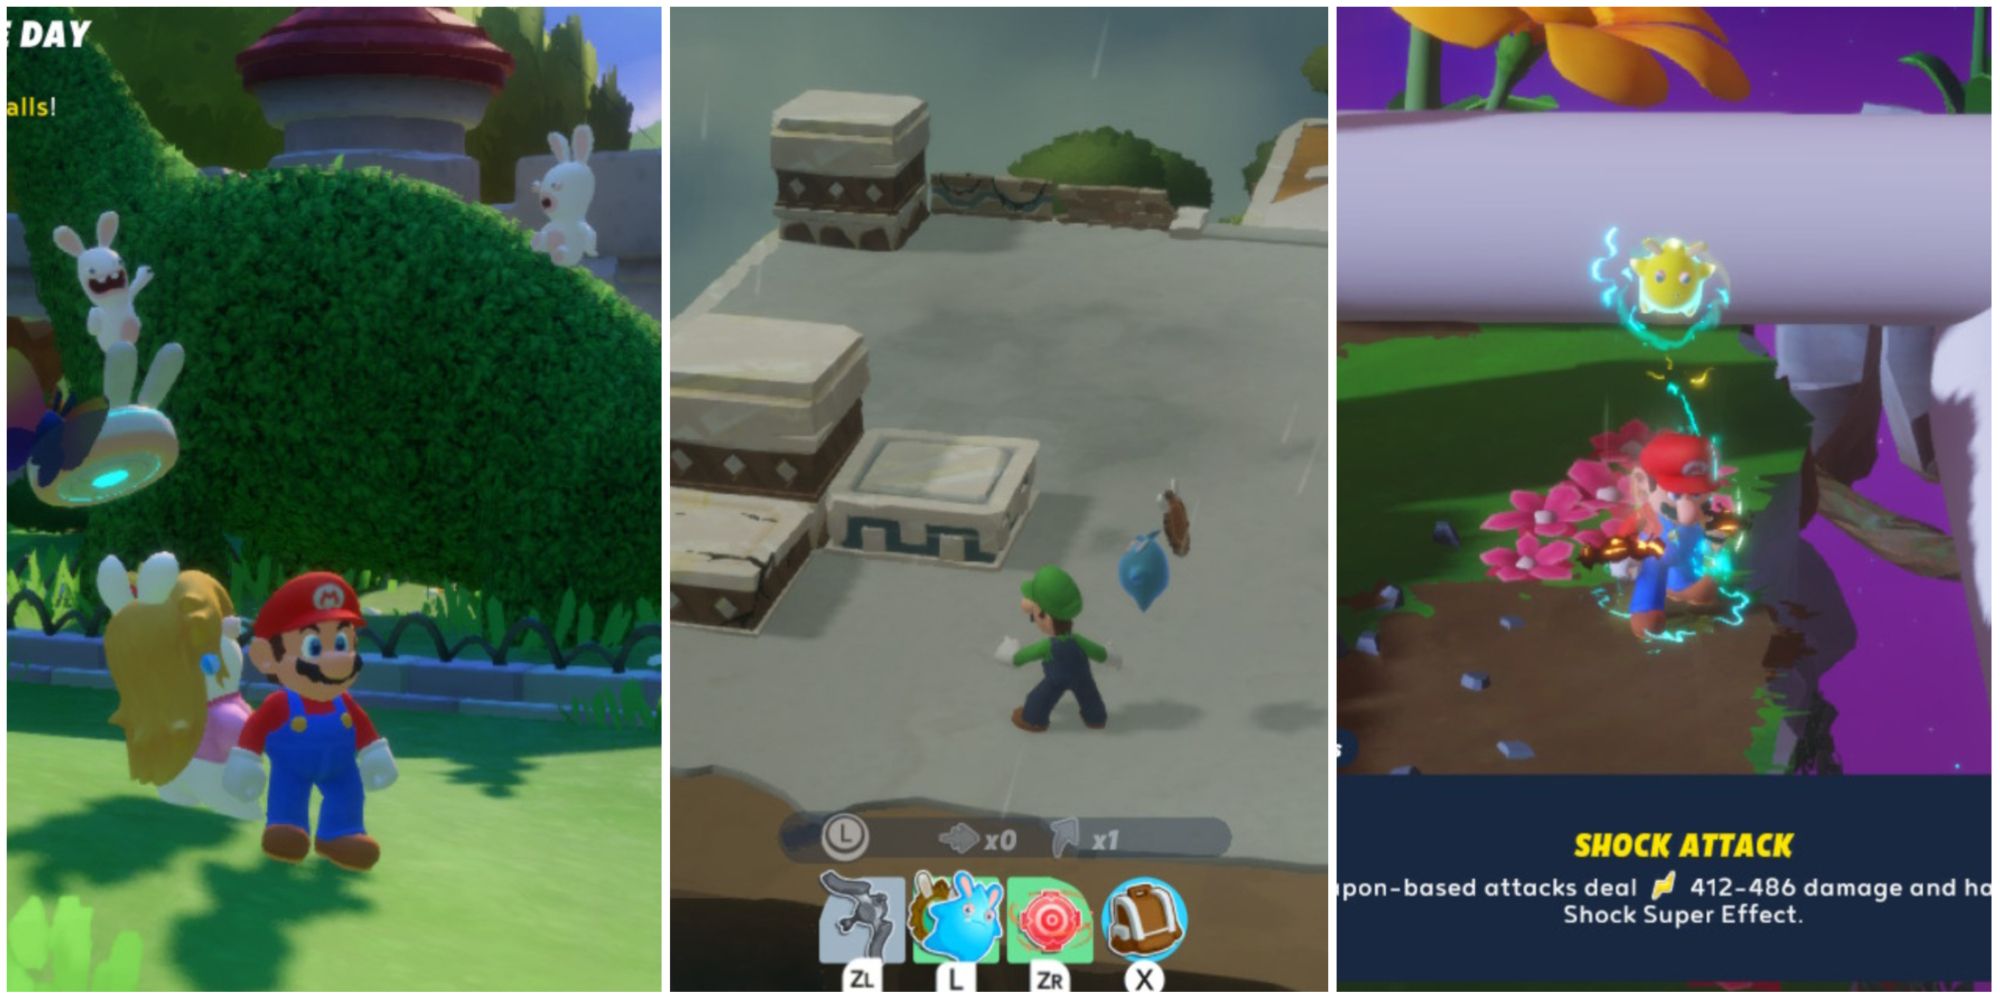 Mario Rabbids Sparks of Hope Relatable Things Featured Rabbids on Hedge Luigi in Battle Mario and Spark